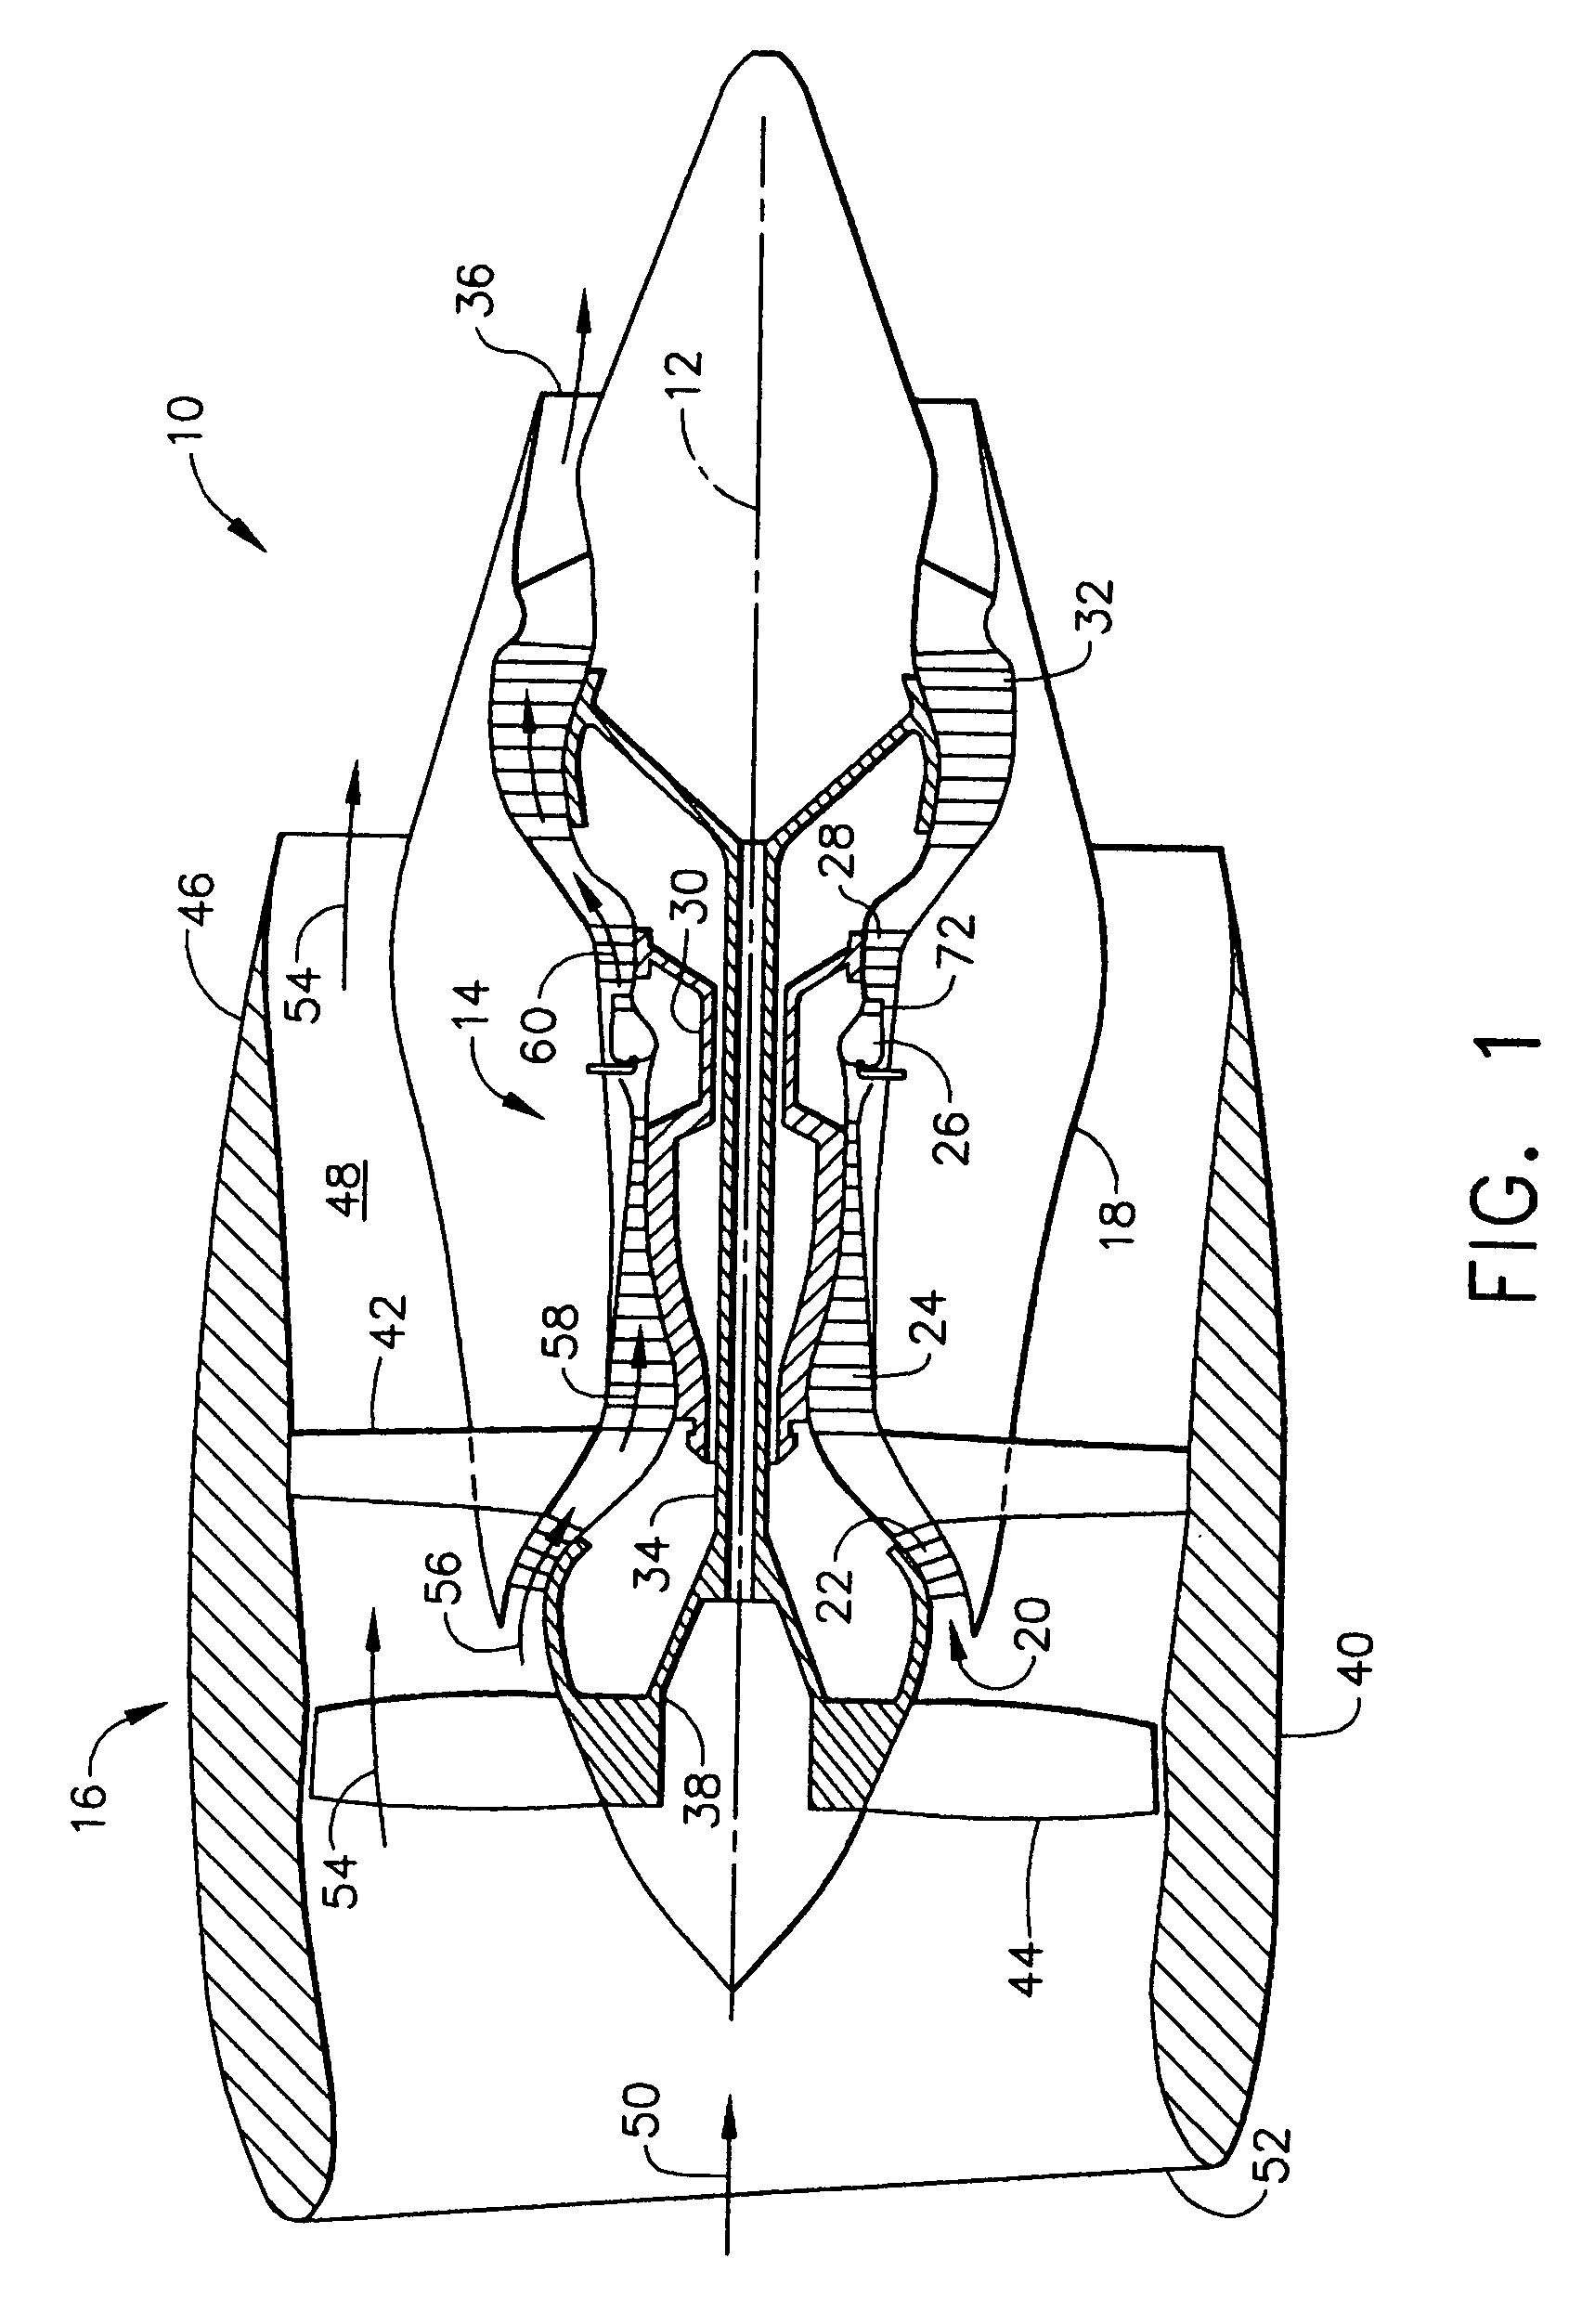 Centerbody for mixer assembly of a gas turbine engine combustor